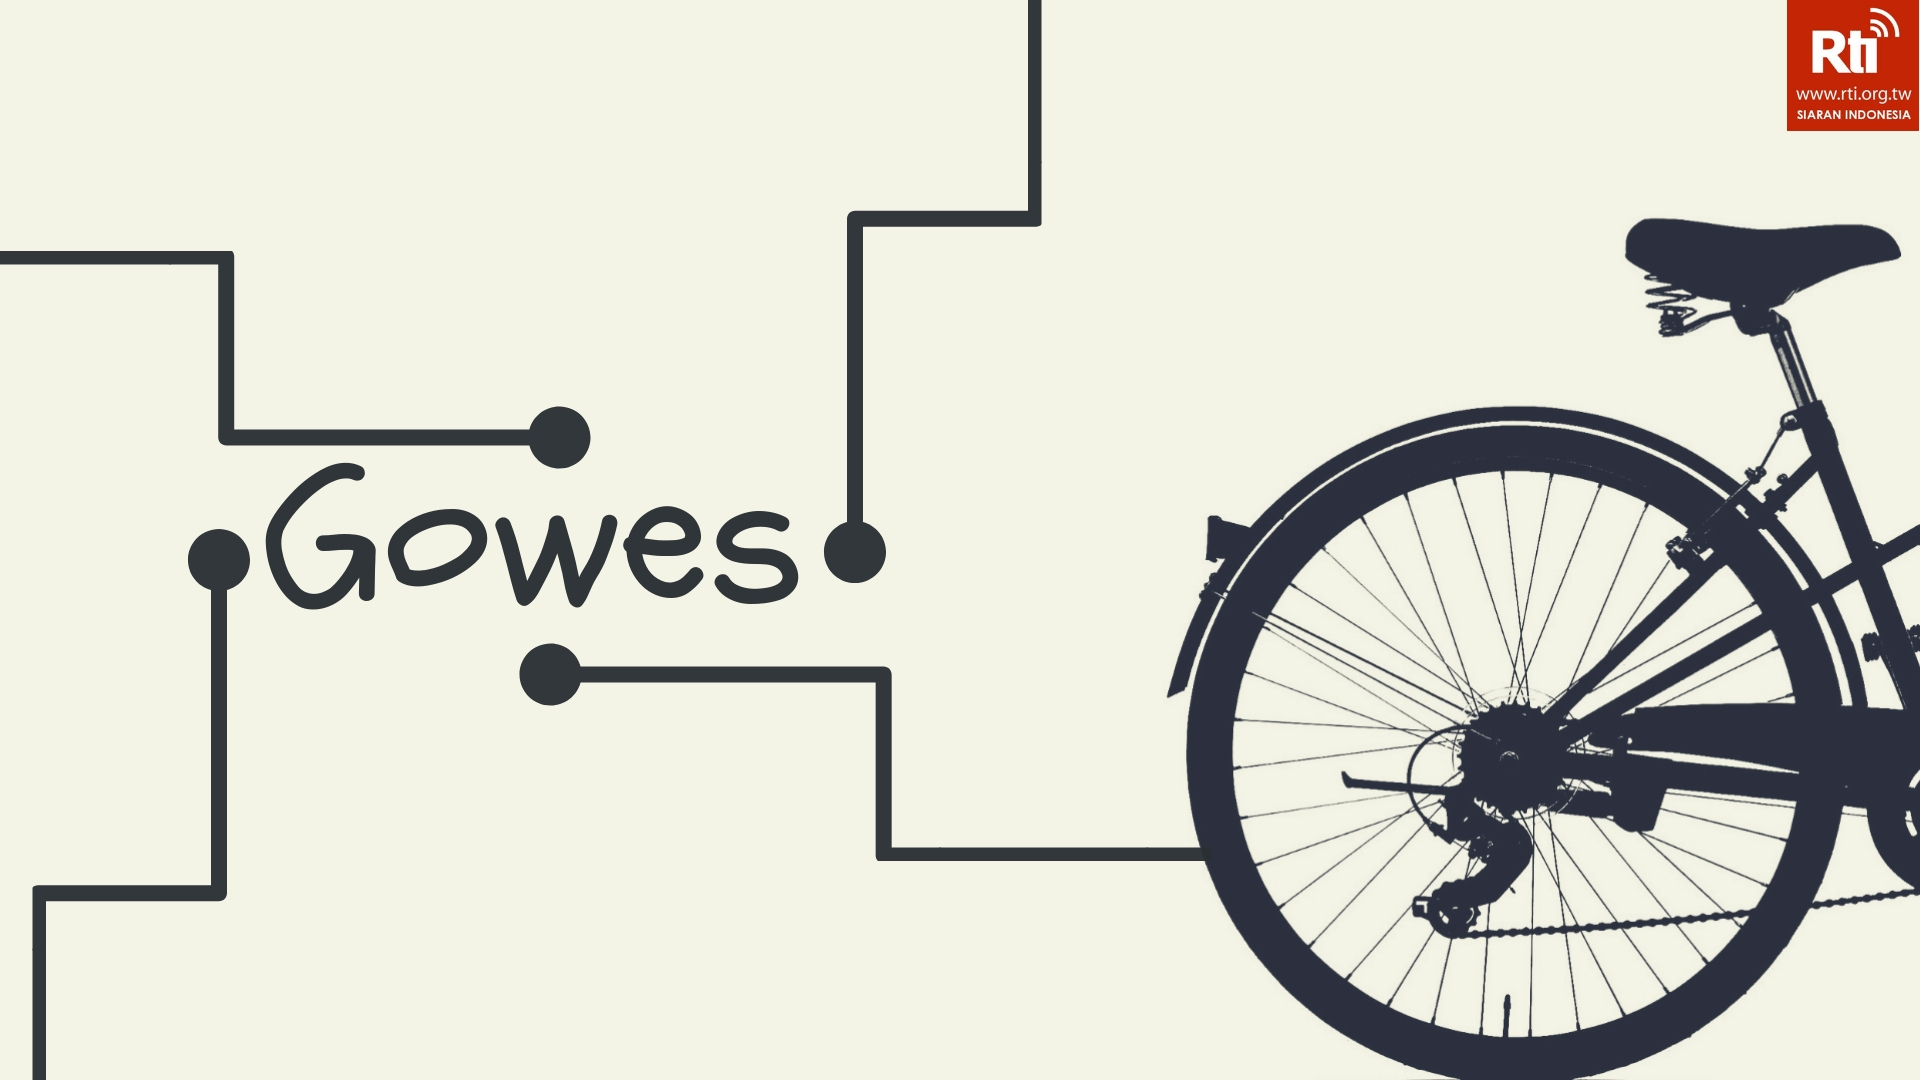 Gowes - 2022-10-28